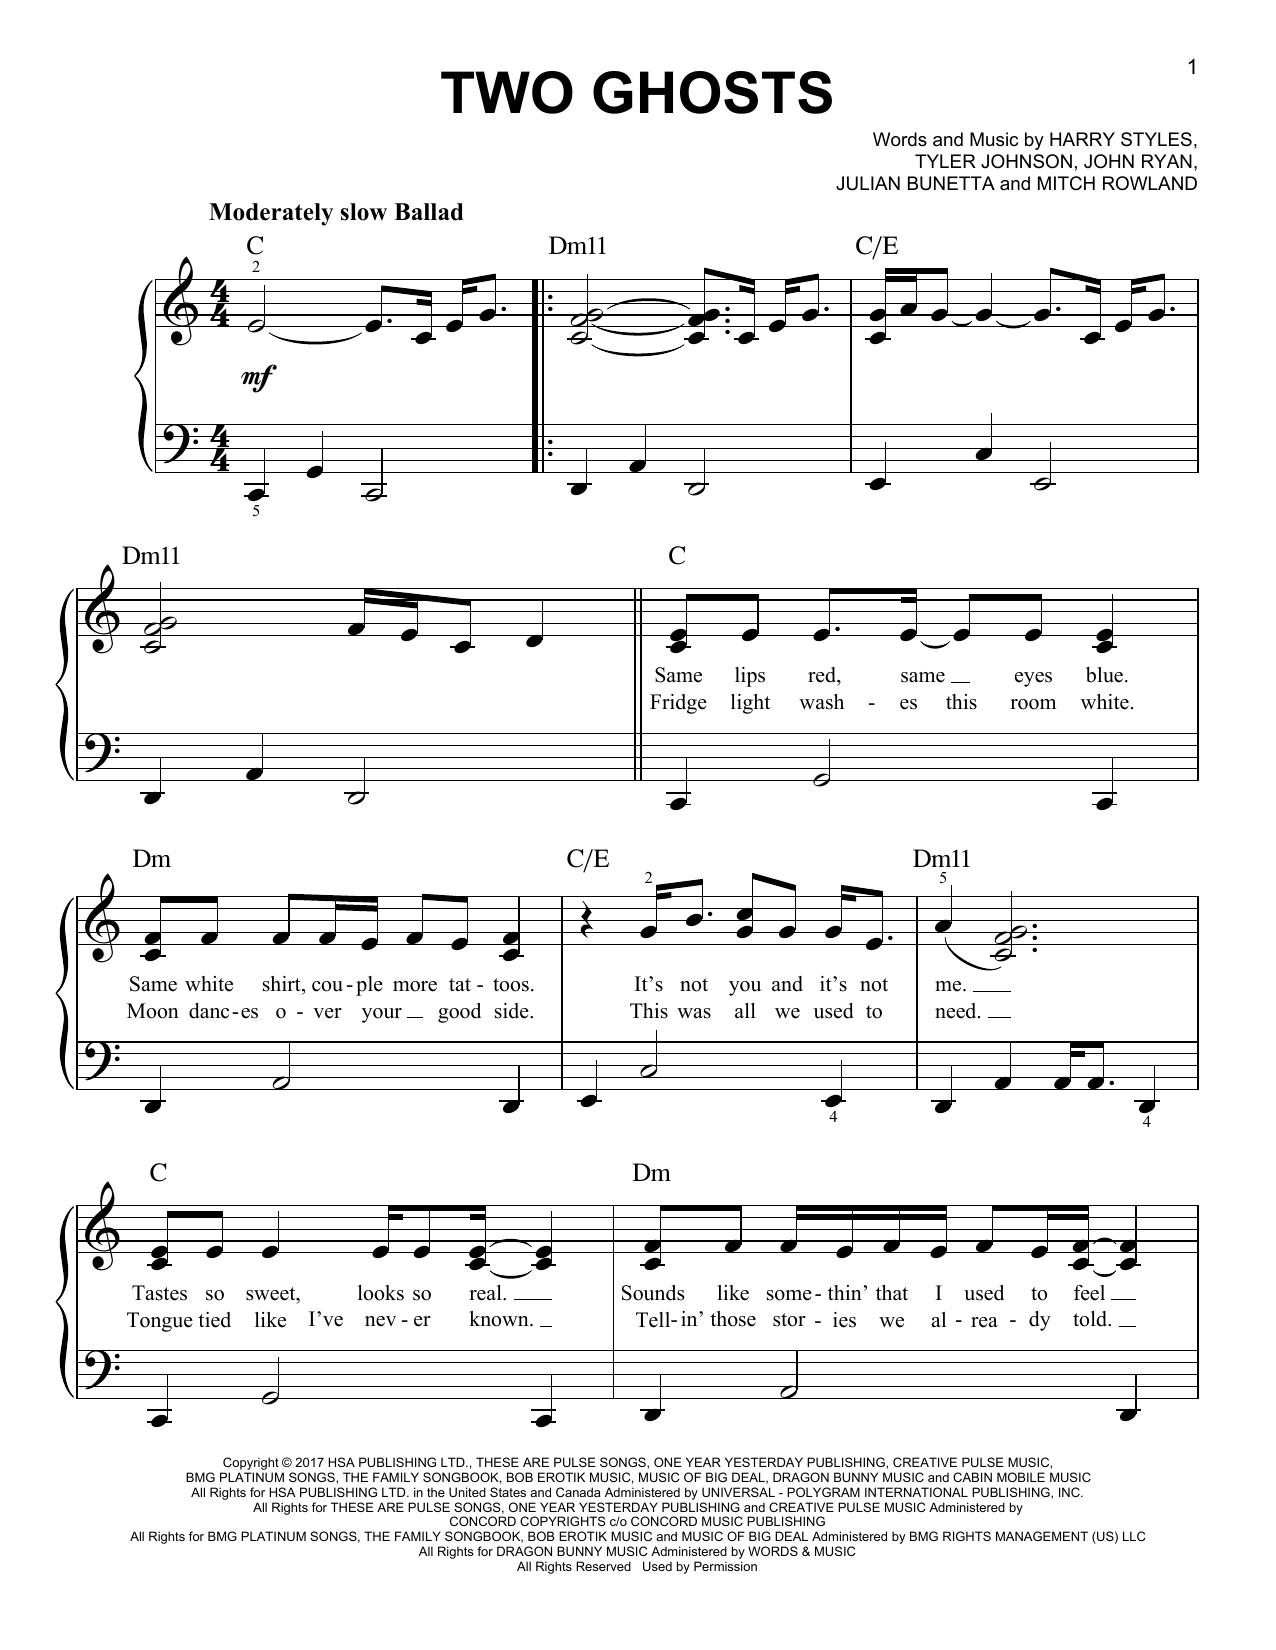 Download Harry Styles Two Ghosts Sheet Music